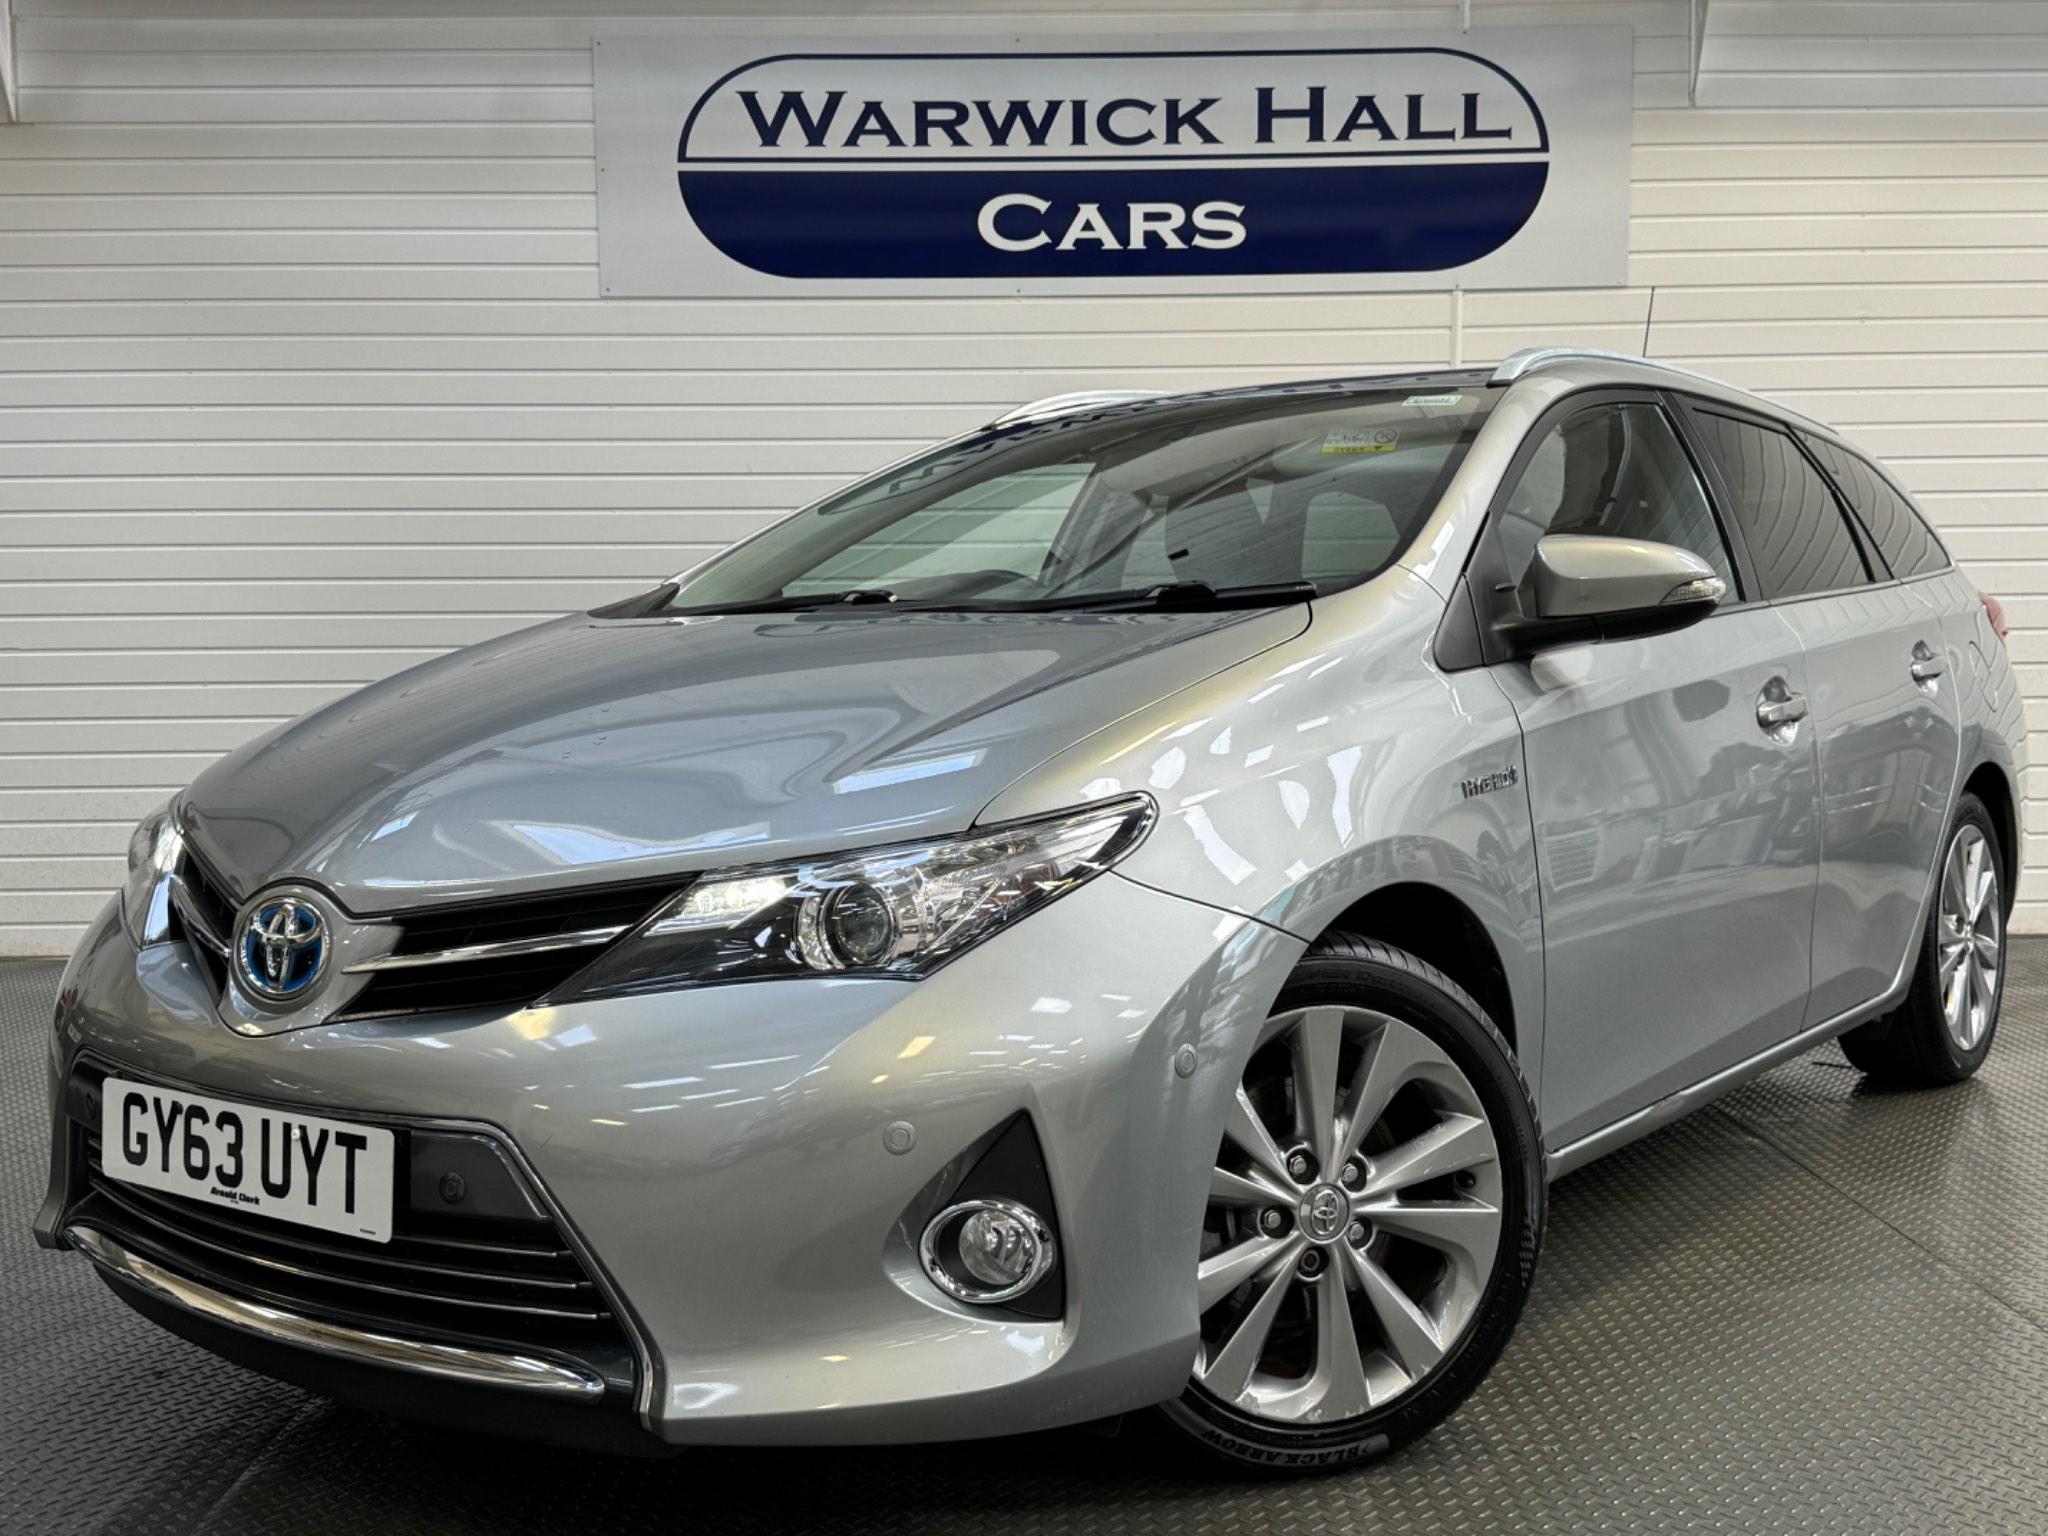 Toyota Auris 1.8 VVT-h Excel Touring Sports CVT Euro 5 (s/s) 5dr For Sale in Greater Manchester